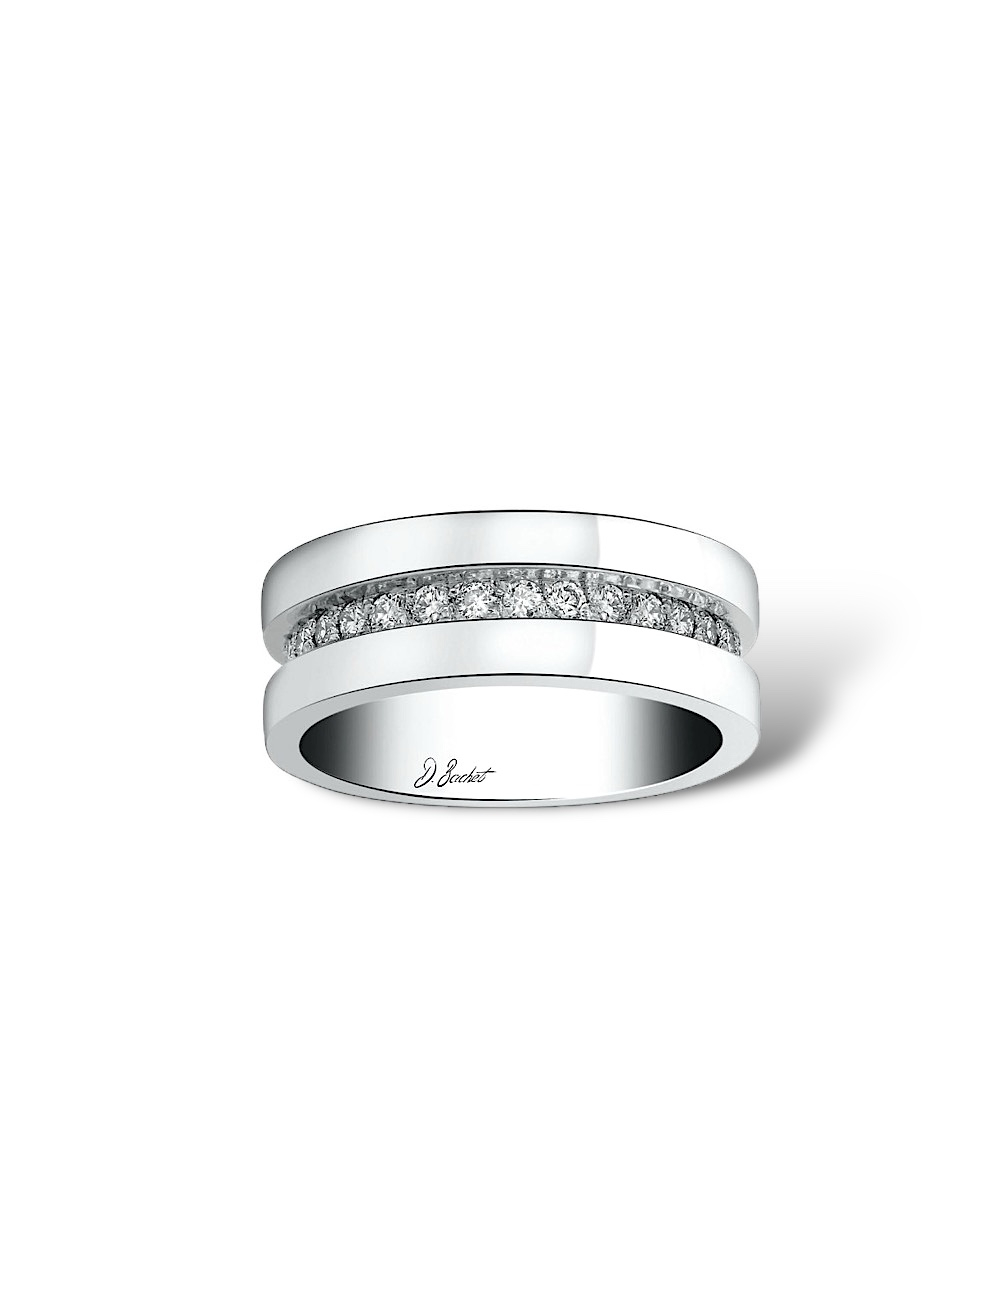 7.5 mm women's diamond wedding band in platinum, gold, comfortable fit, D.Bachet France craftsmanship, also with black diamonds.